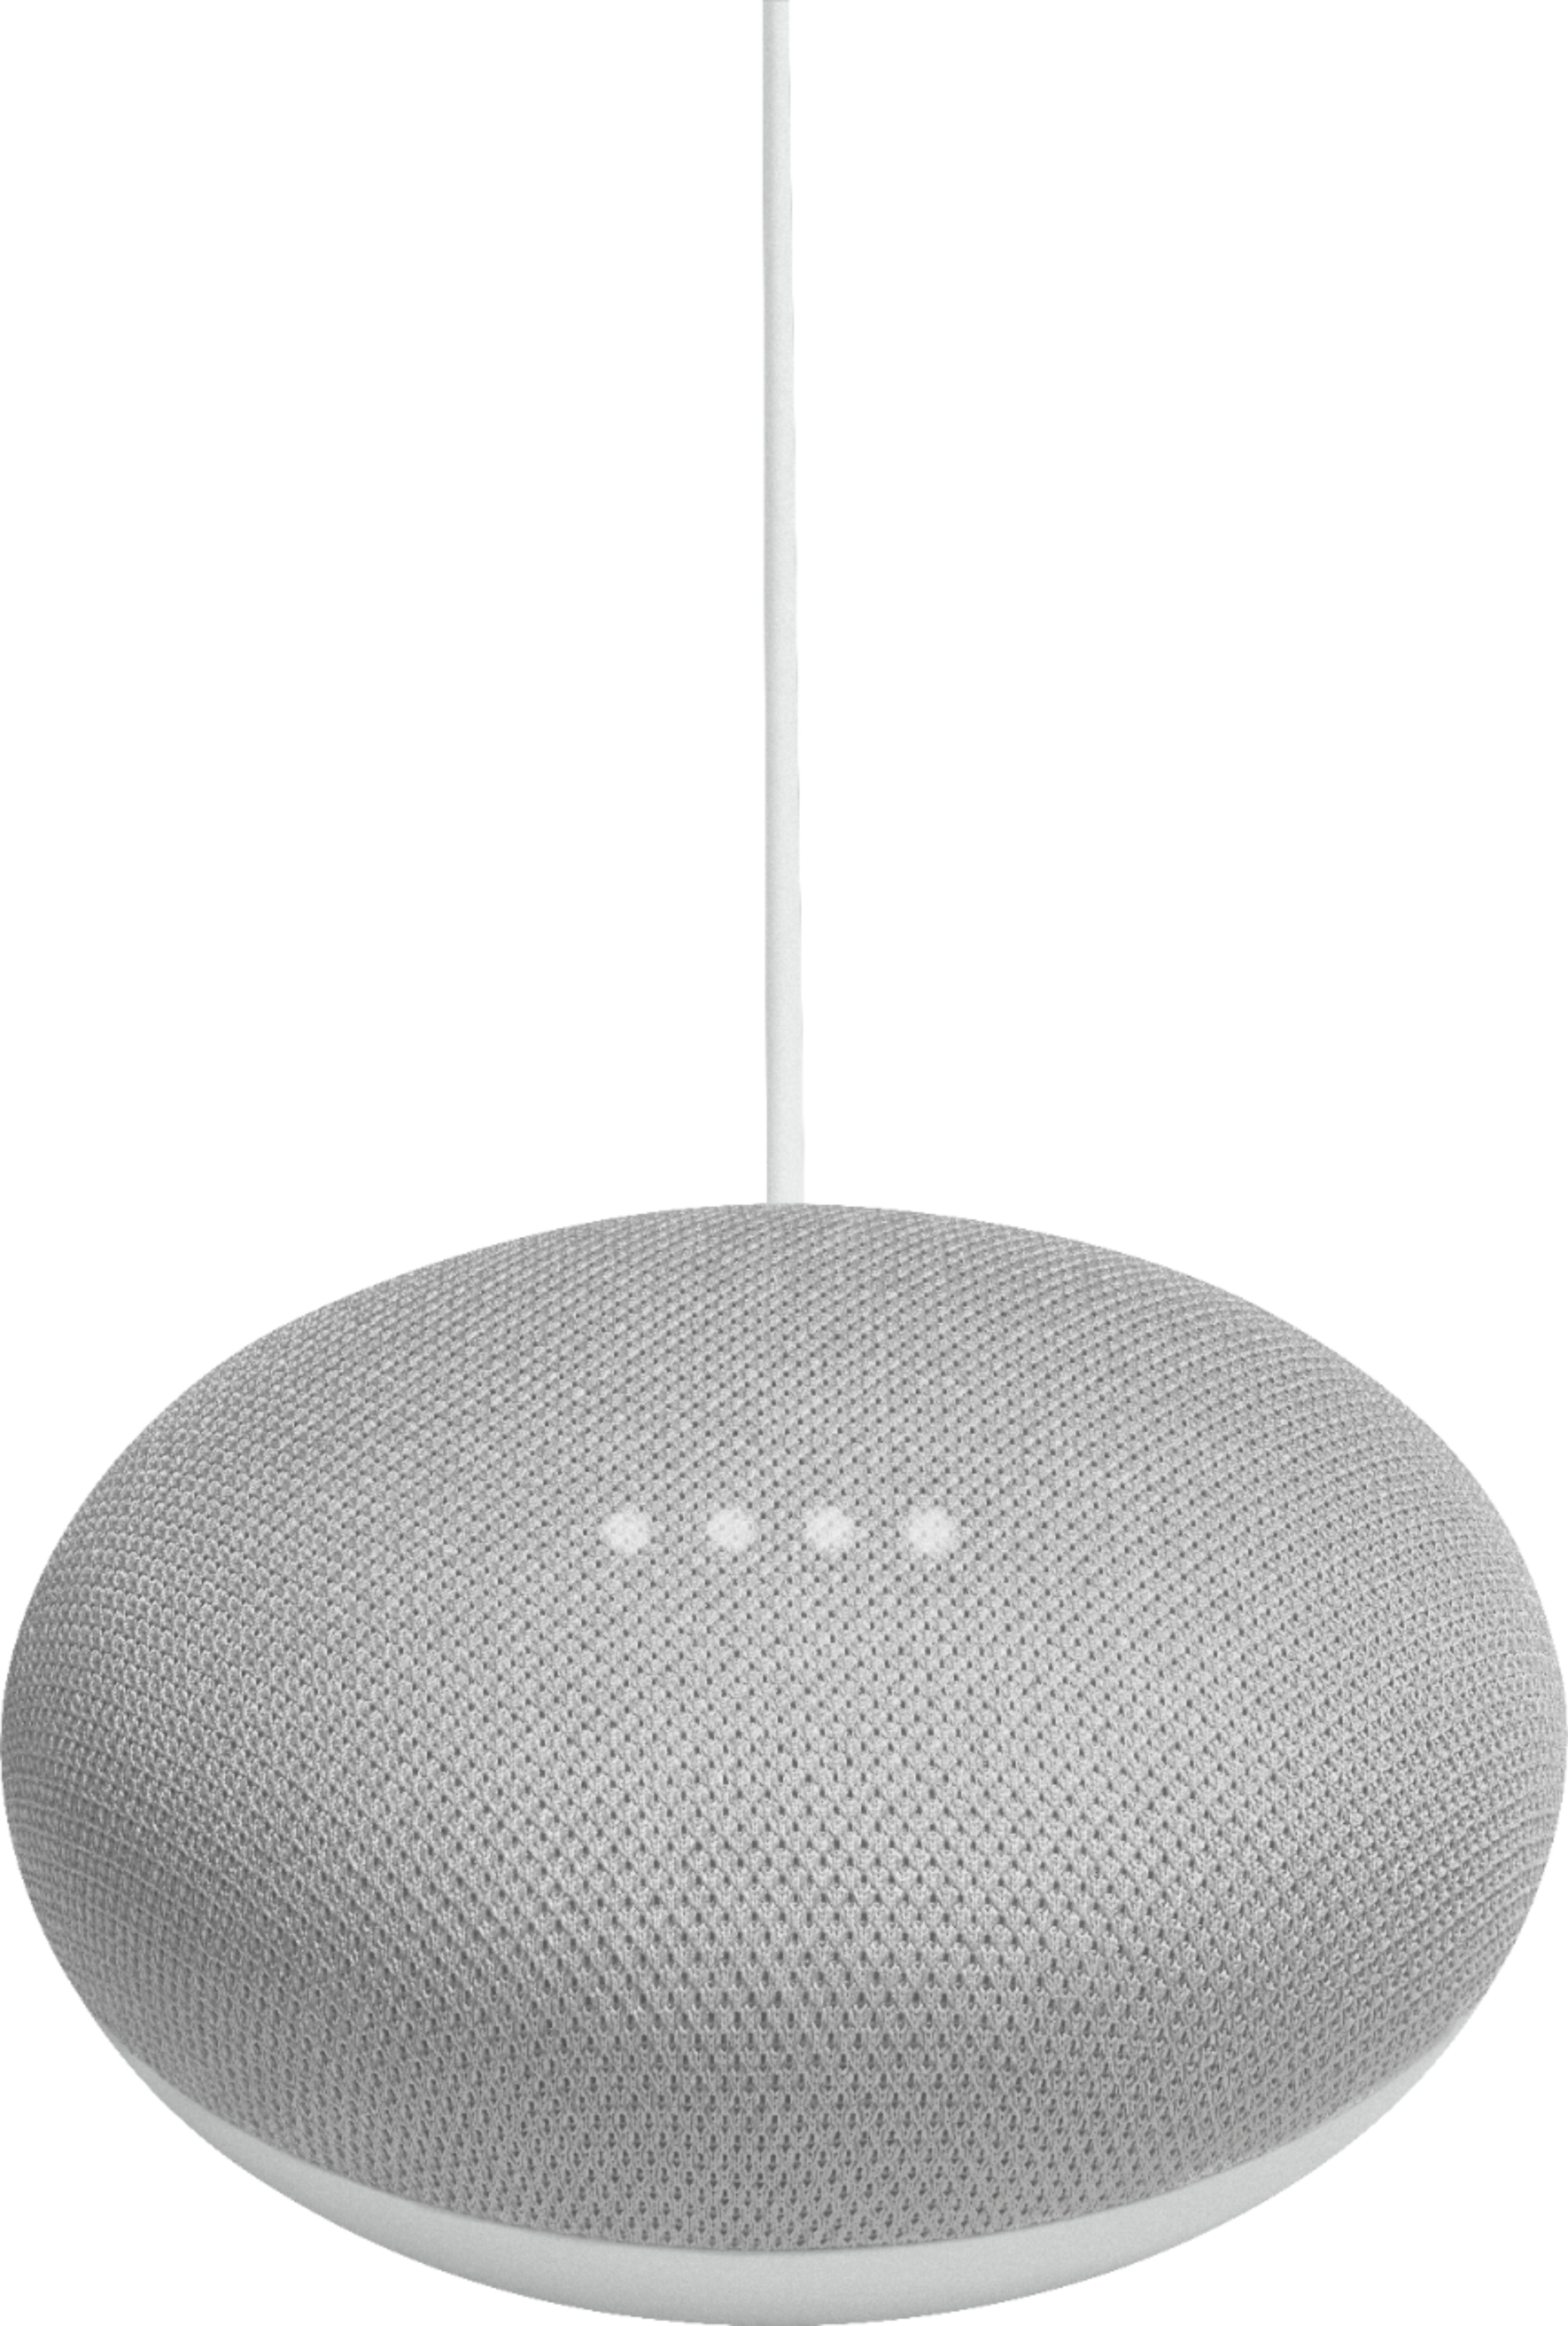 Charcoal Google Home Mini Smart Speaker with Google Assistant 